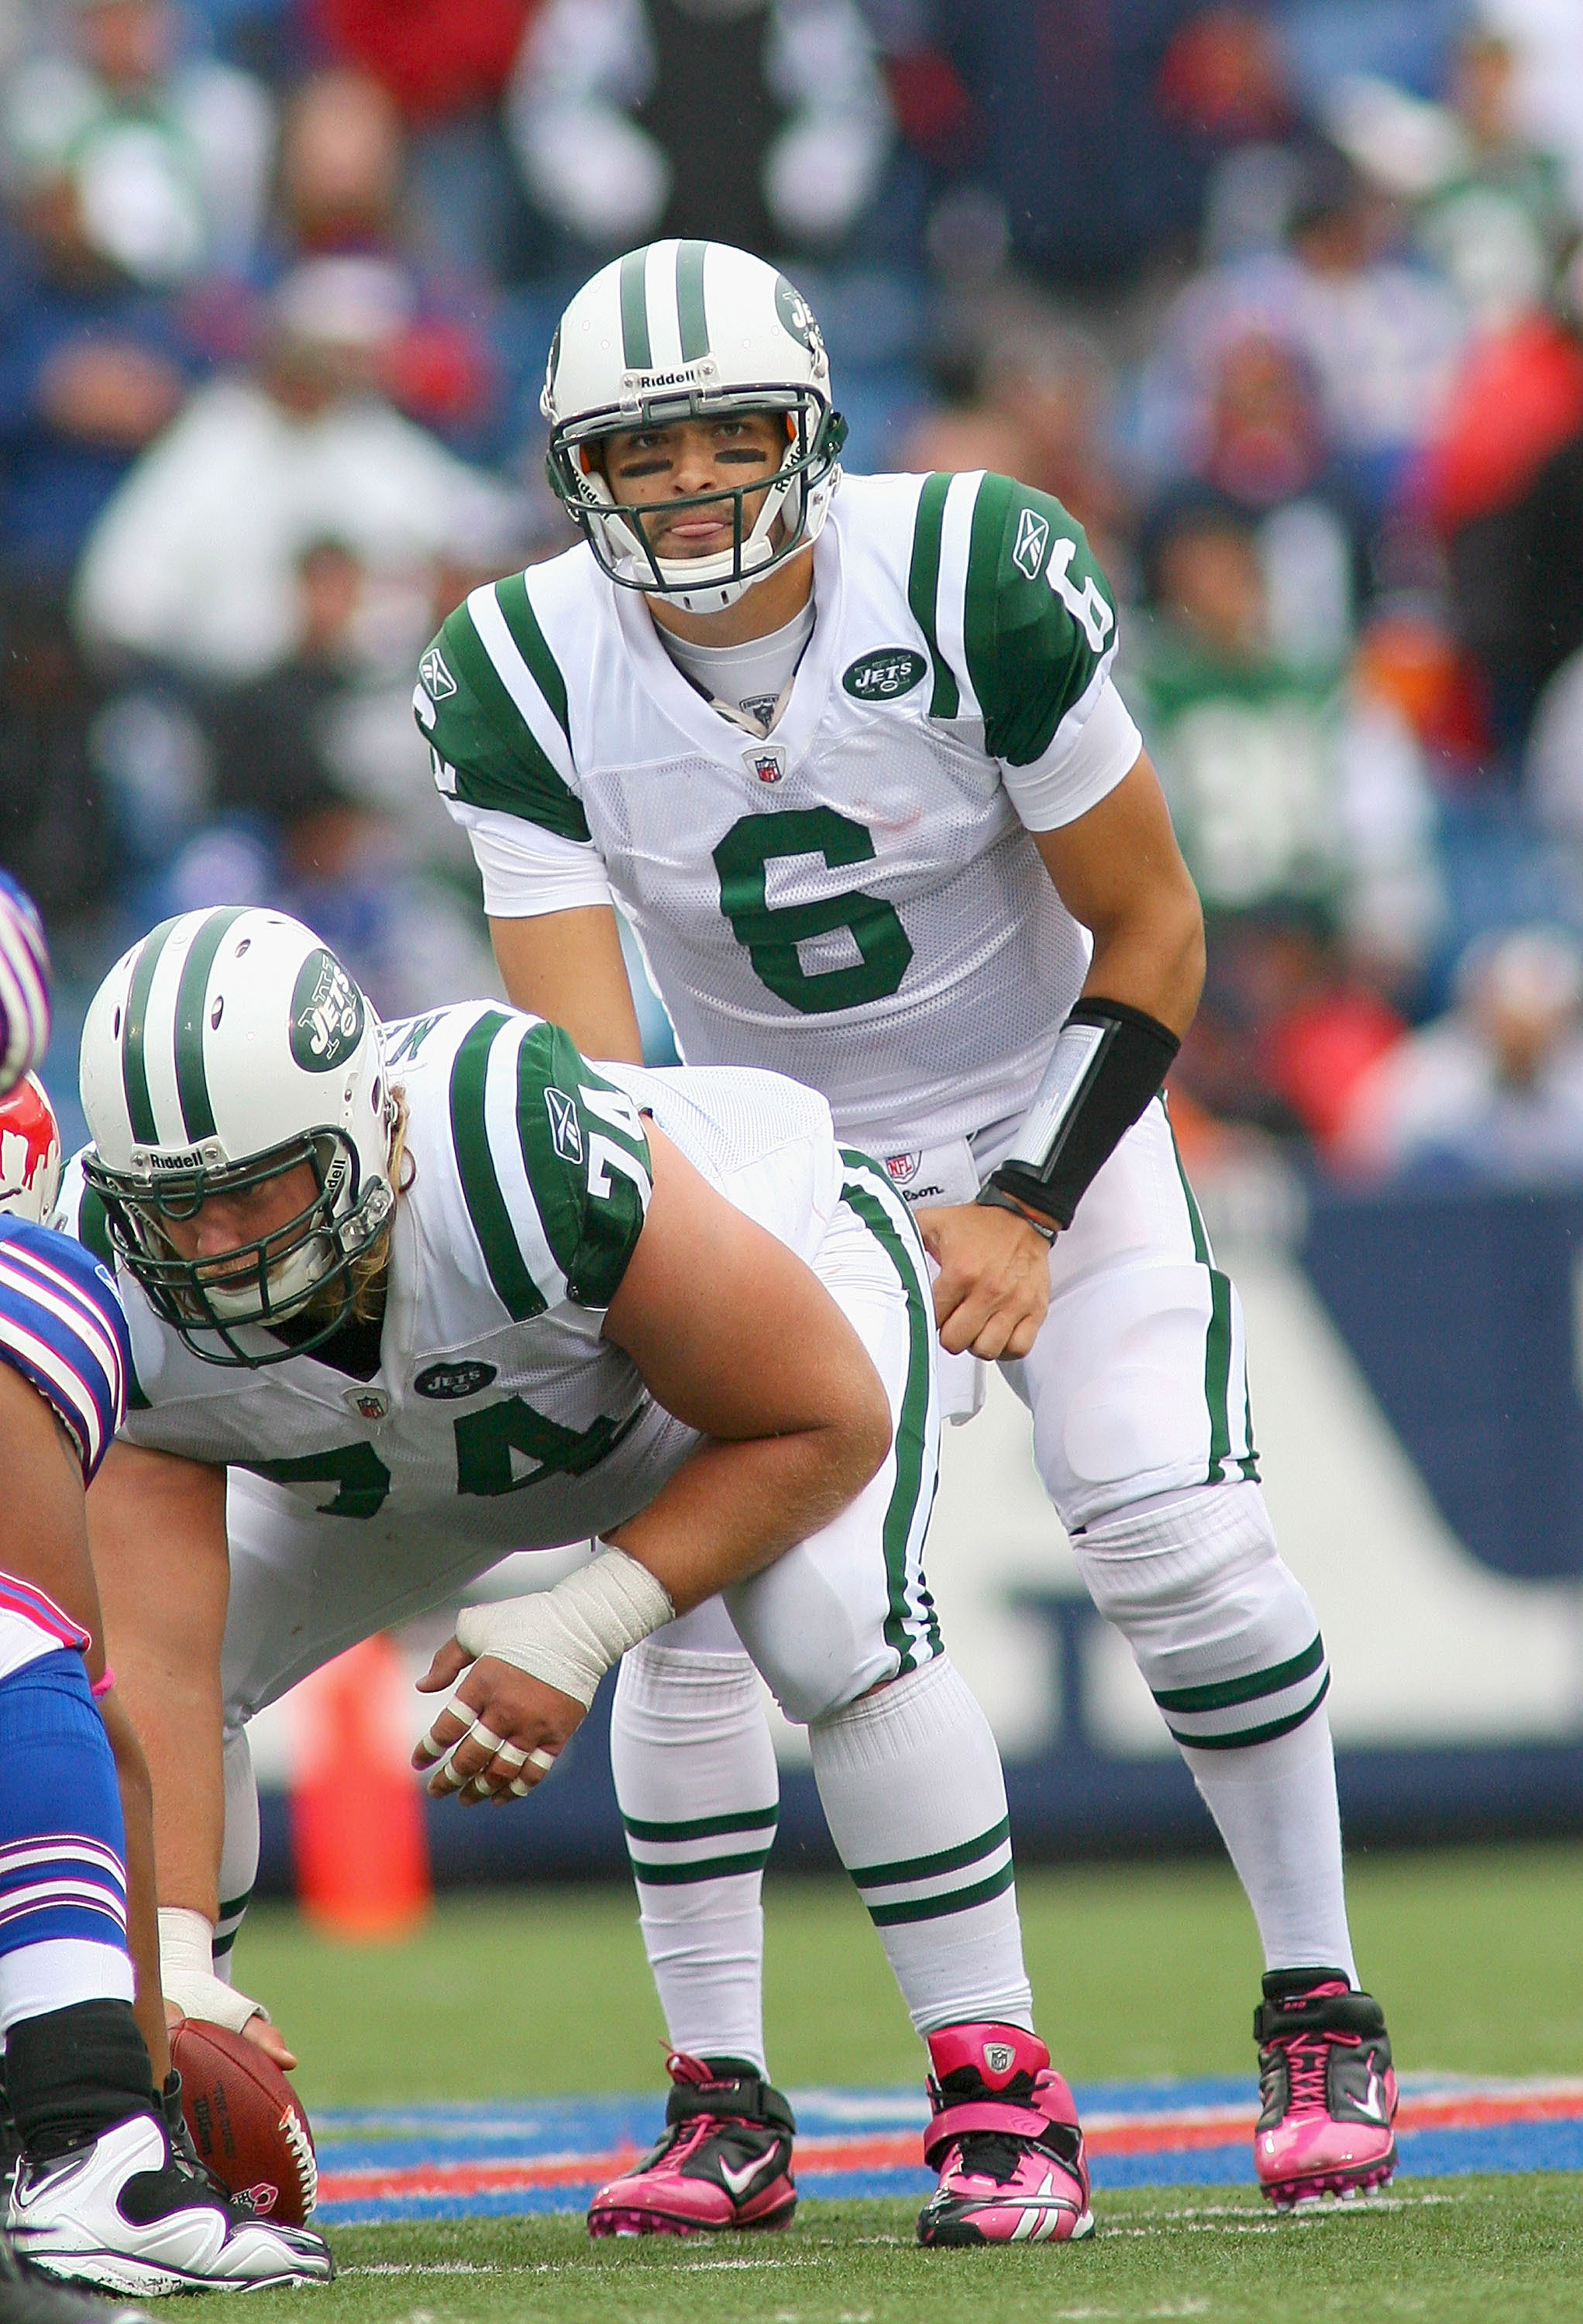 ORCHARD PARK, NY - OCTOBER 03: Mark Sanchez #6  of the New York Jets lines up behind center Nick Mangold #74 against the Buffalo Bills at Ralph Wilson Stadium on October 3, 2010 in Orchard Park, New York. The Jets won 38-14. (Photo by Rick Stewart/Getty I